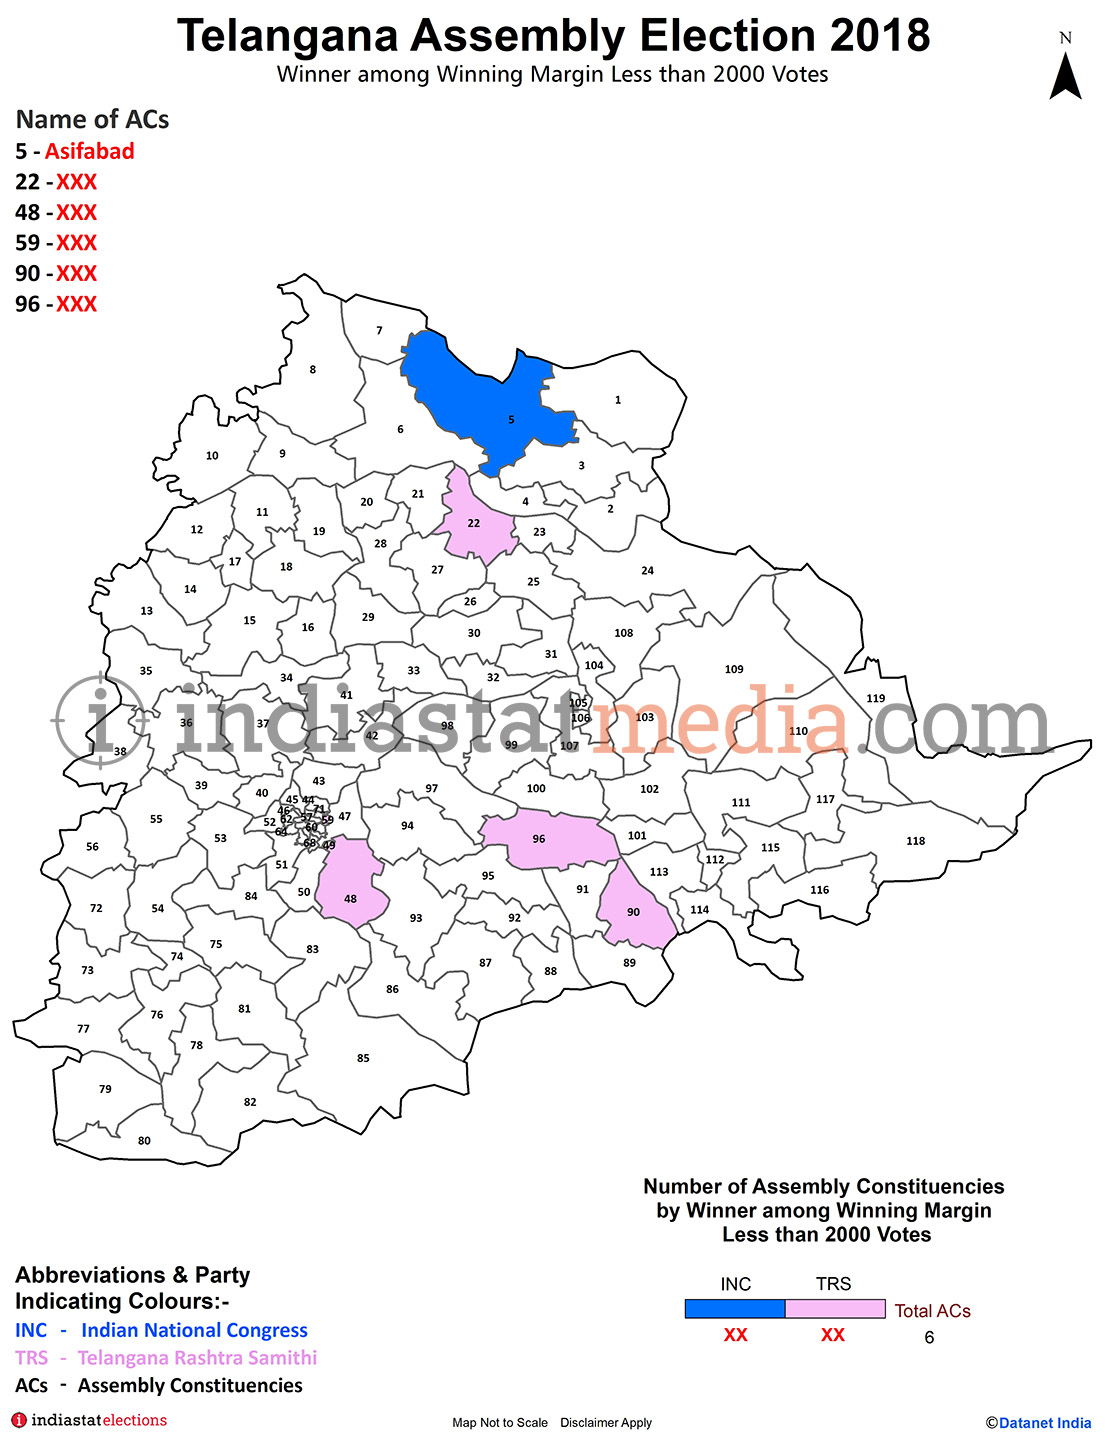 Winner among Winning Margin Less than 2000 Votes in Telangana (Assembly Election - 2018)